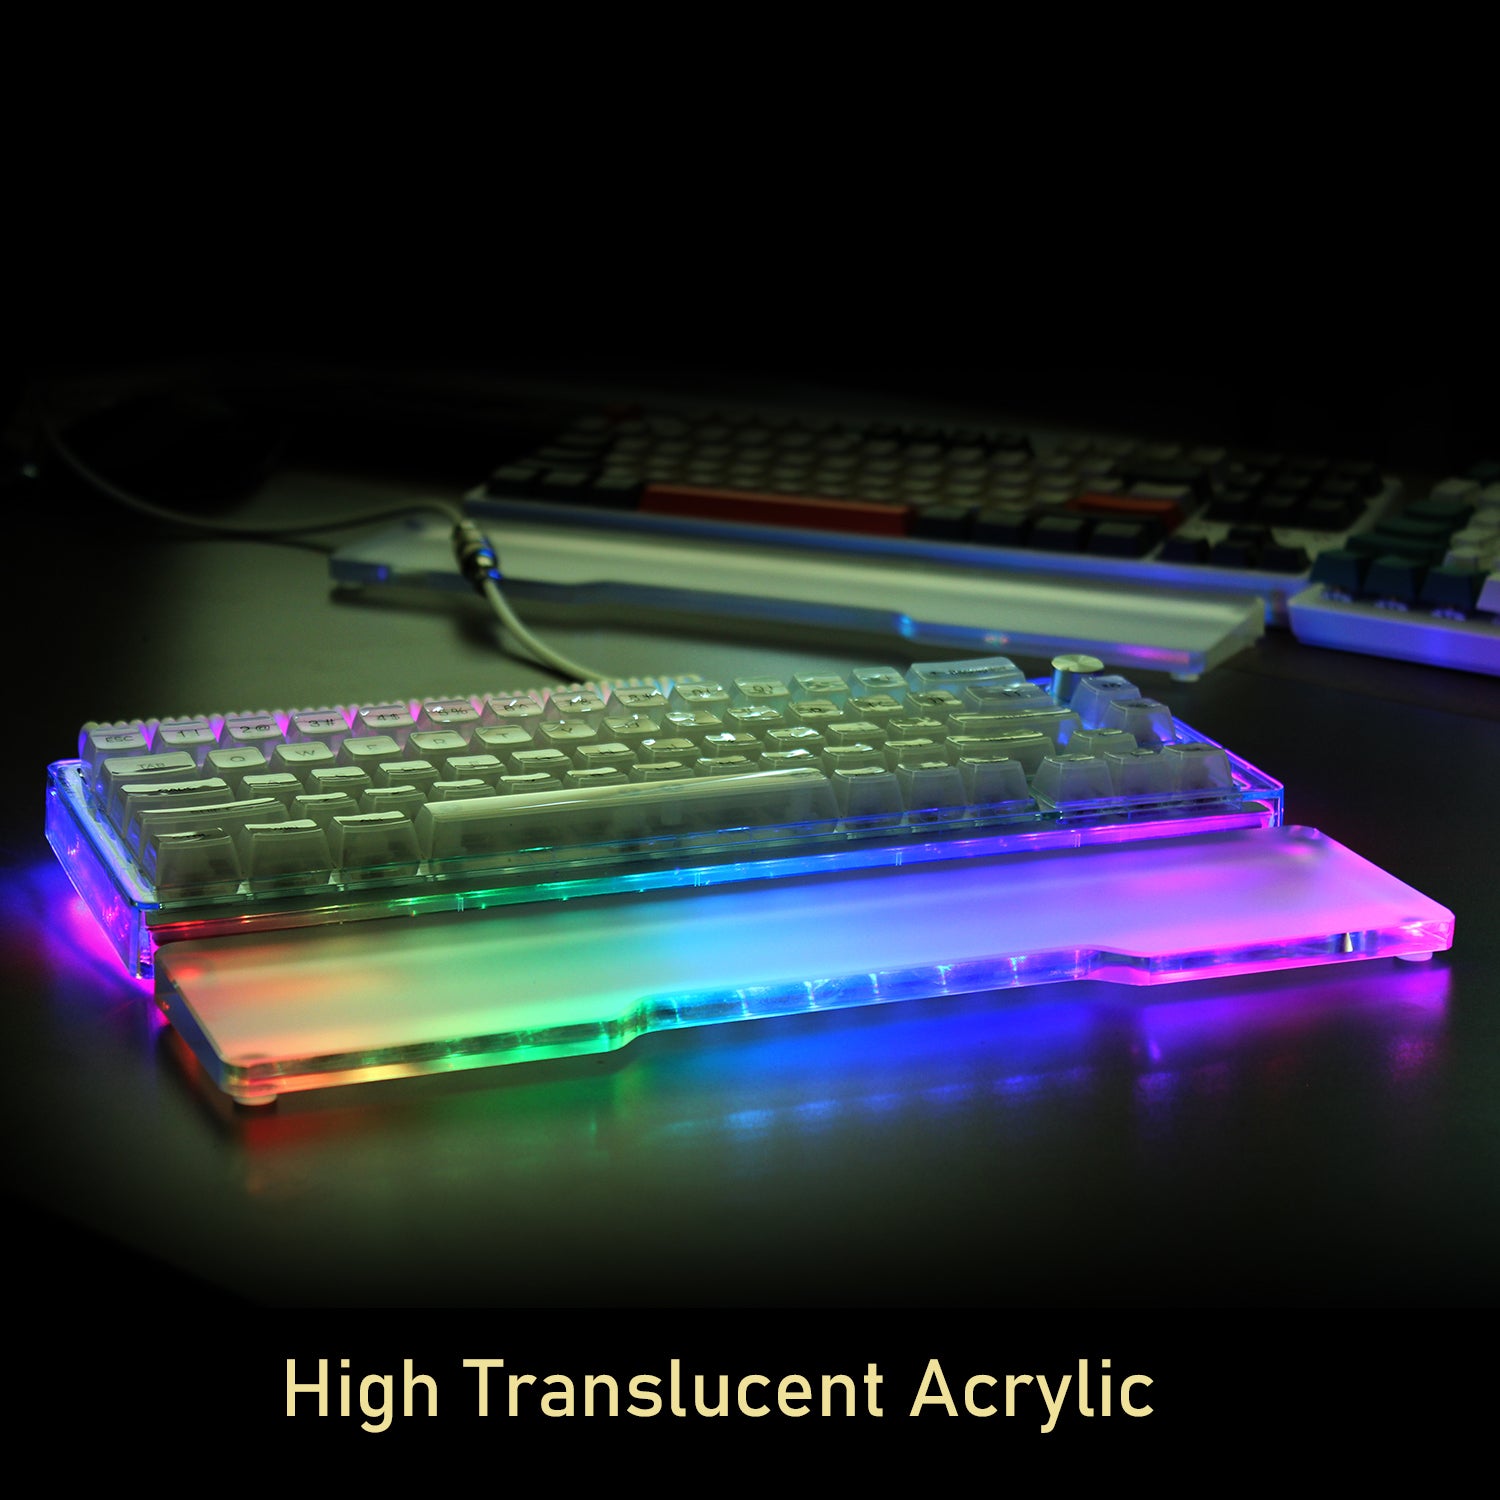 Ergonomic Wrist Rest, Acrylic Keyboard Wrist Support, Premier Clear Acrylic, Anti-Slip Rubber Feet For Office/Gaming/Typing/Laptop